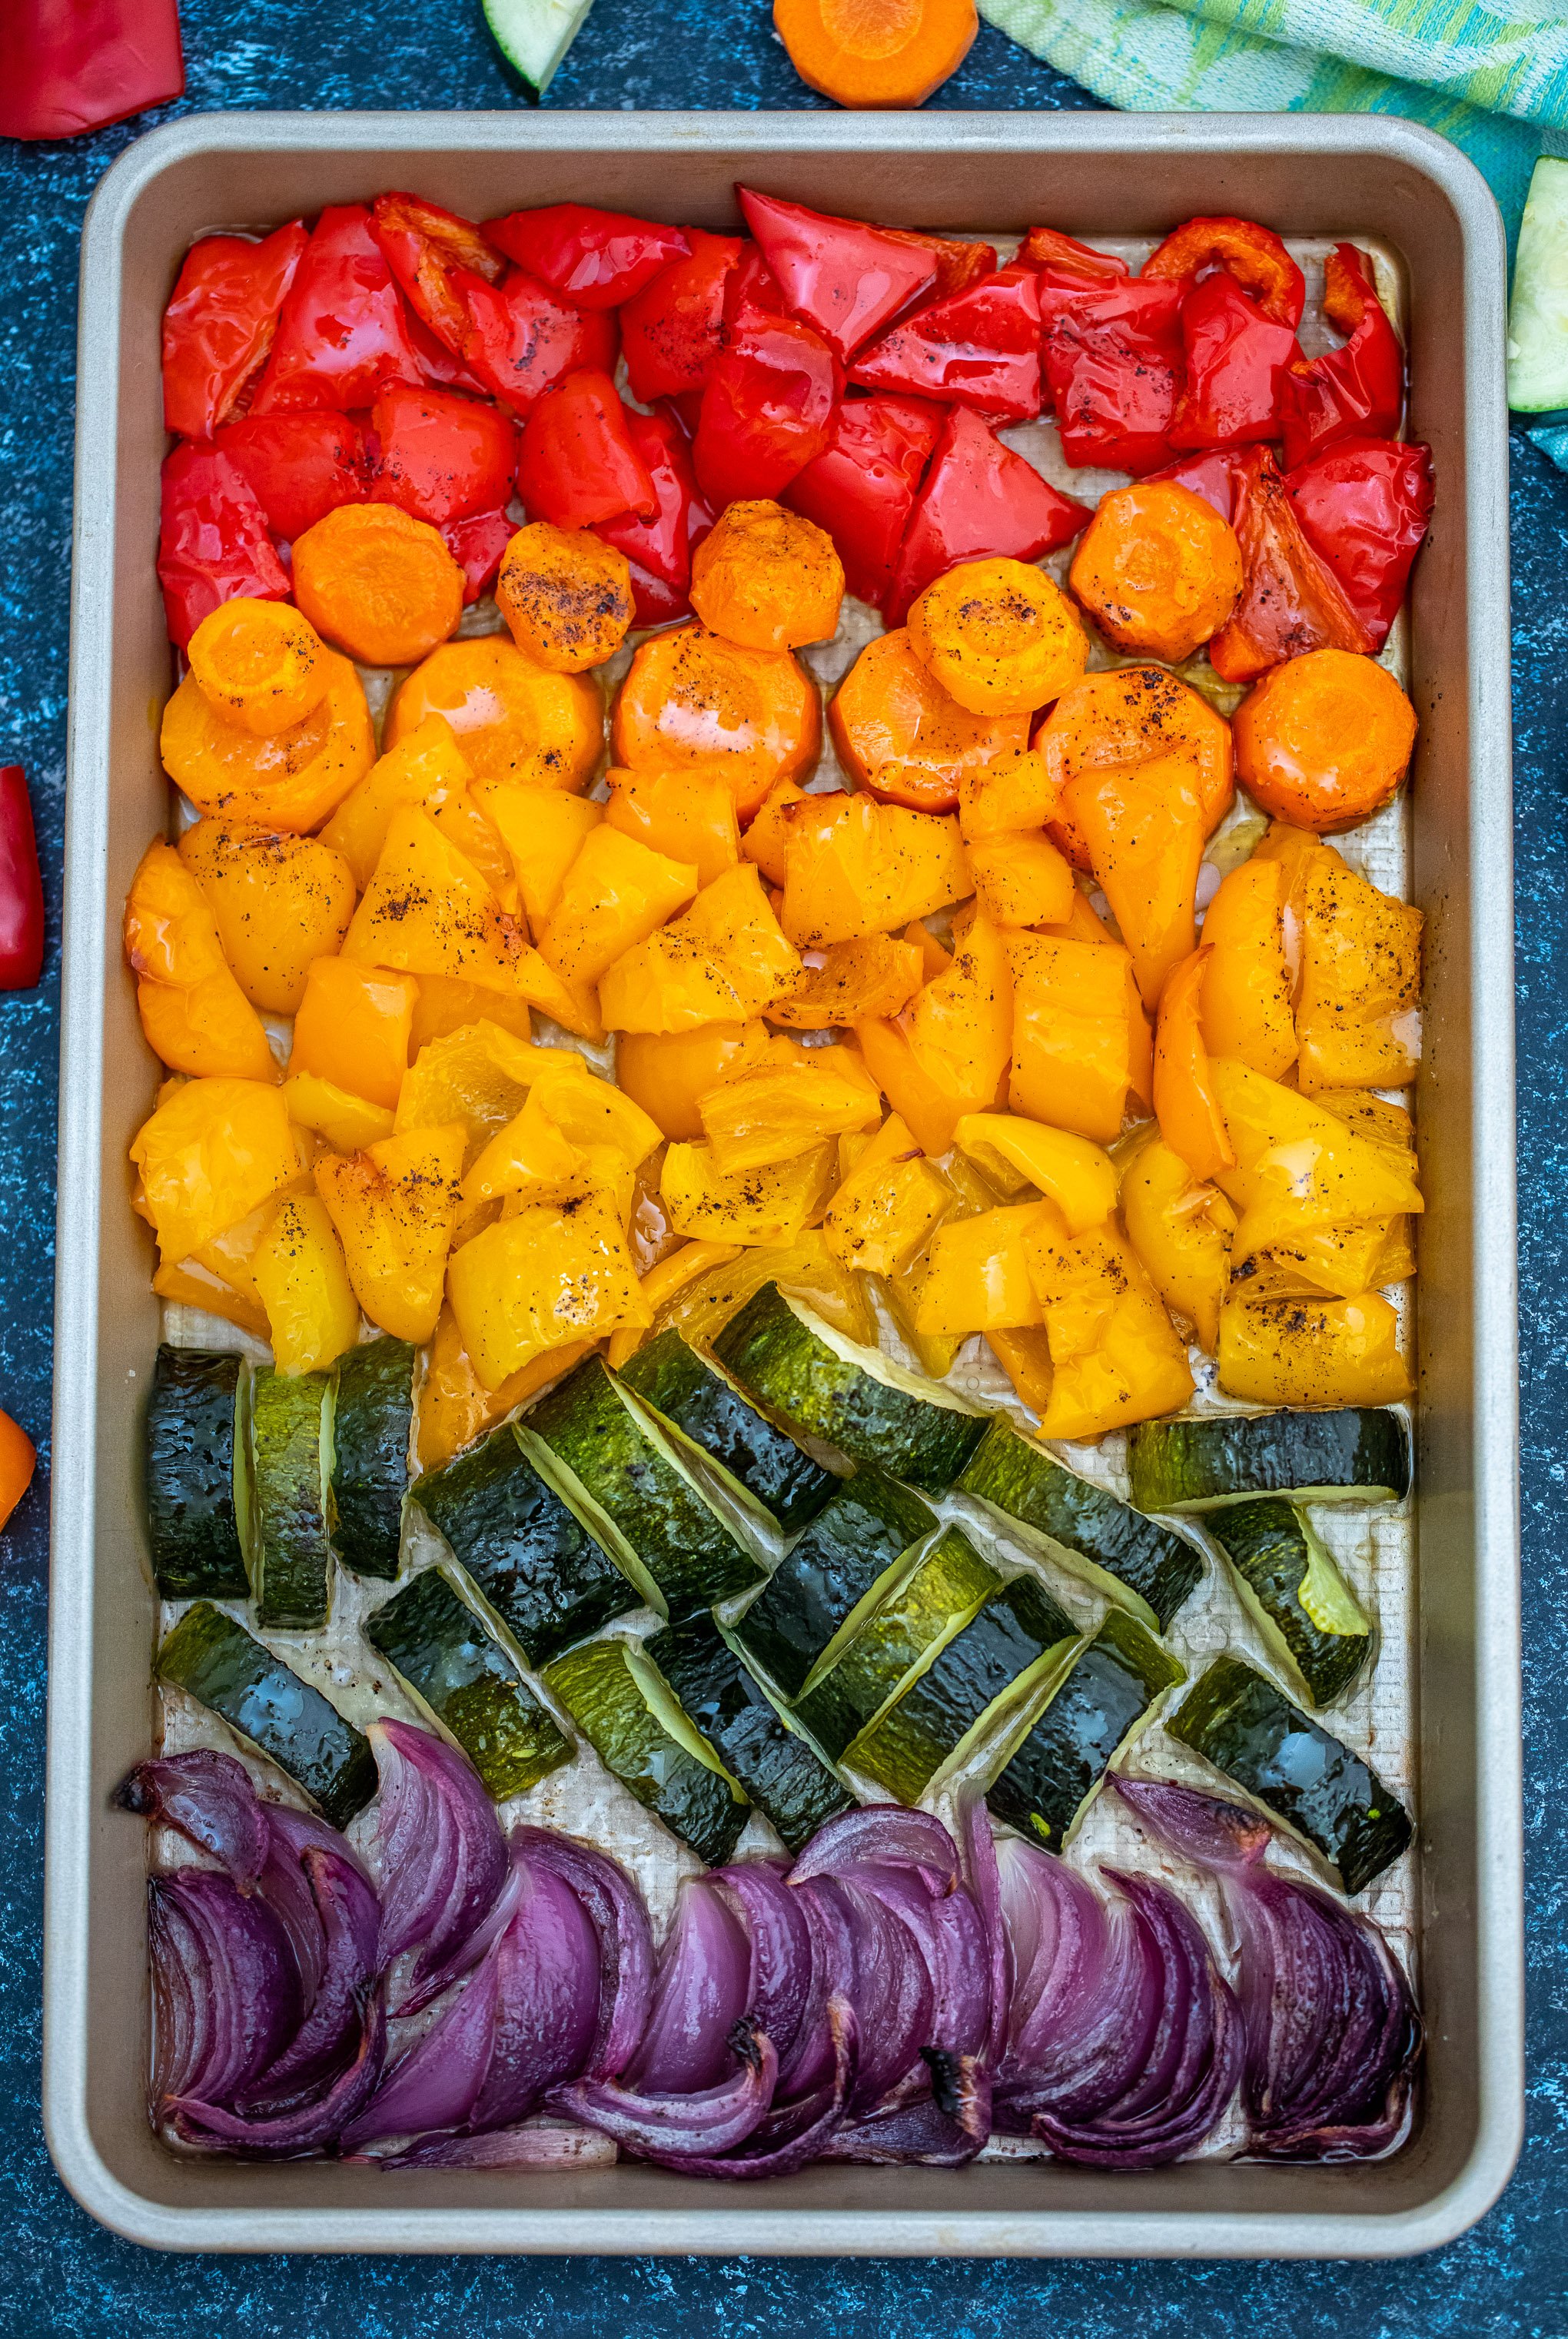 Colorful vegetable dishes